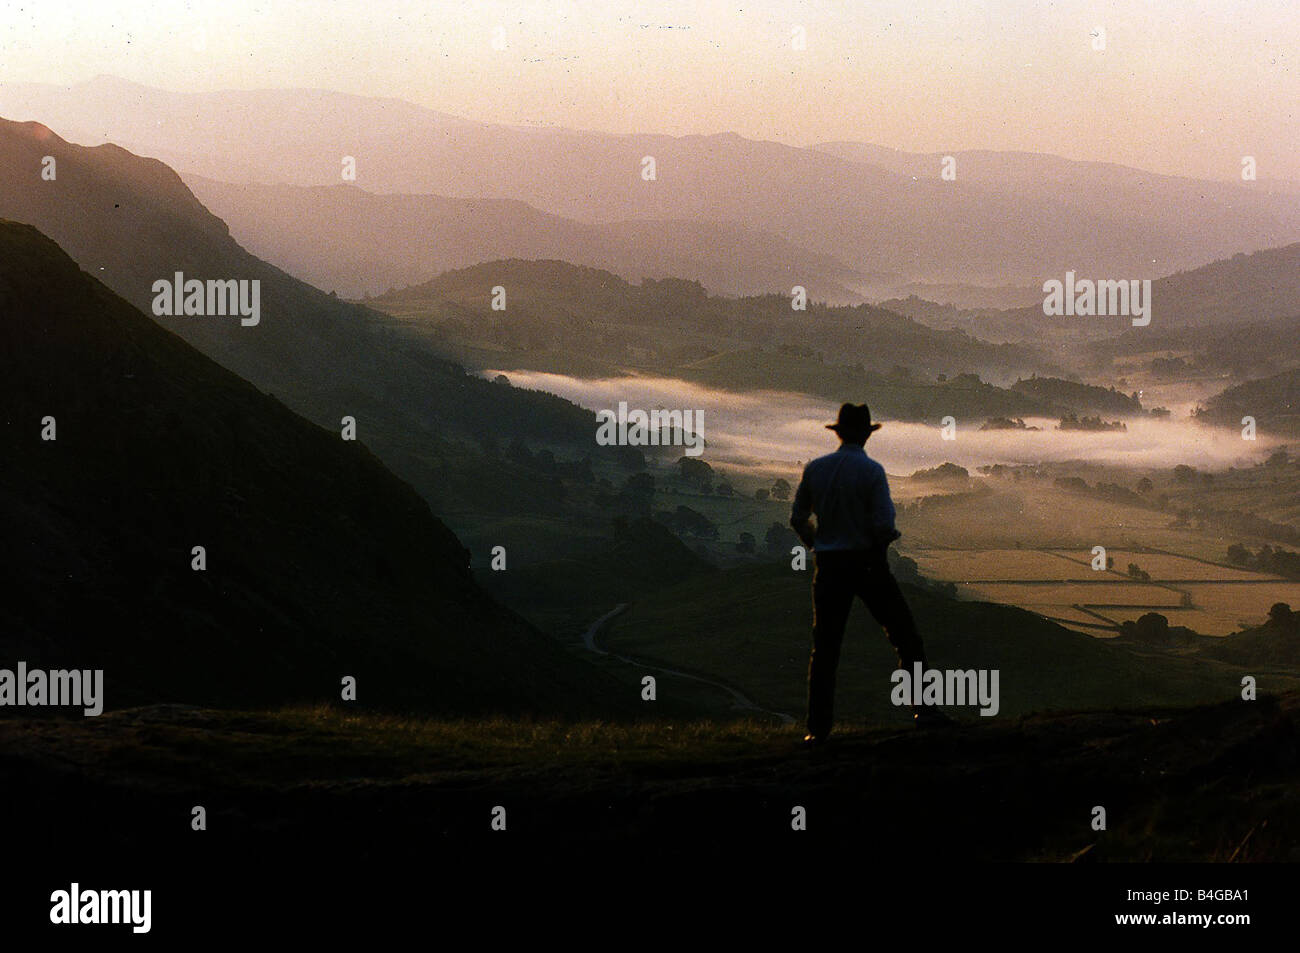 Lake District dawn rises in a lakeland pass watched by man in hat Stock Photo